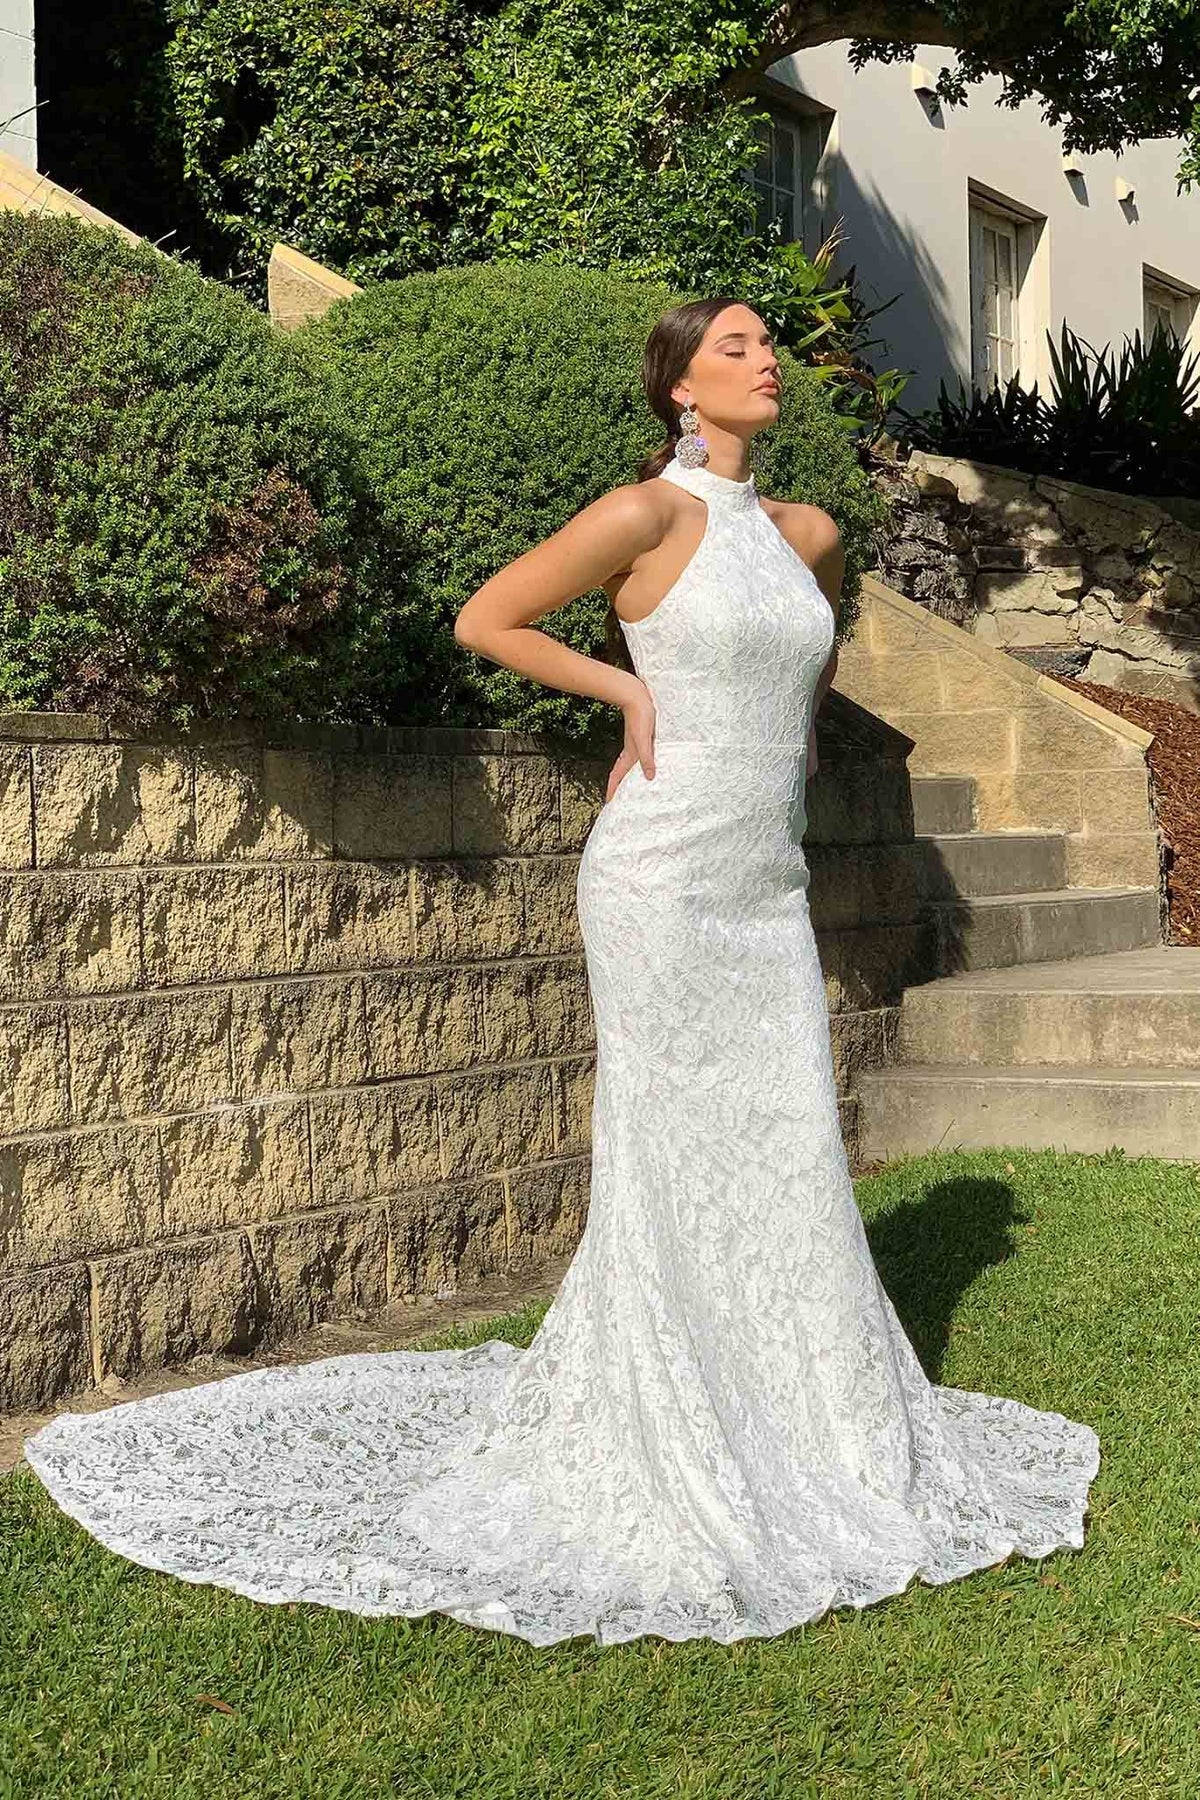 White Lace Wedding Formal Long Trumpet Sleeveless Gown with High Neckline and Long Train